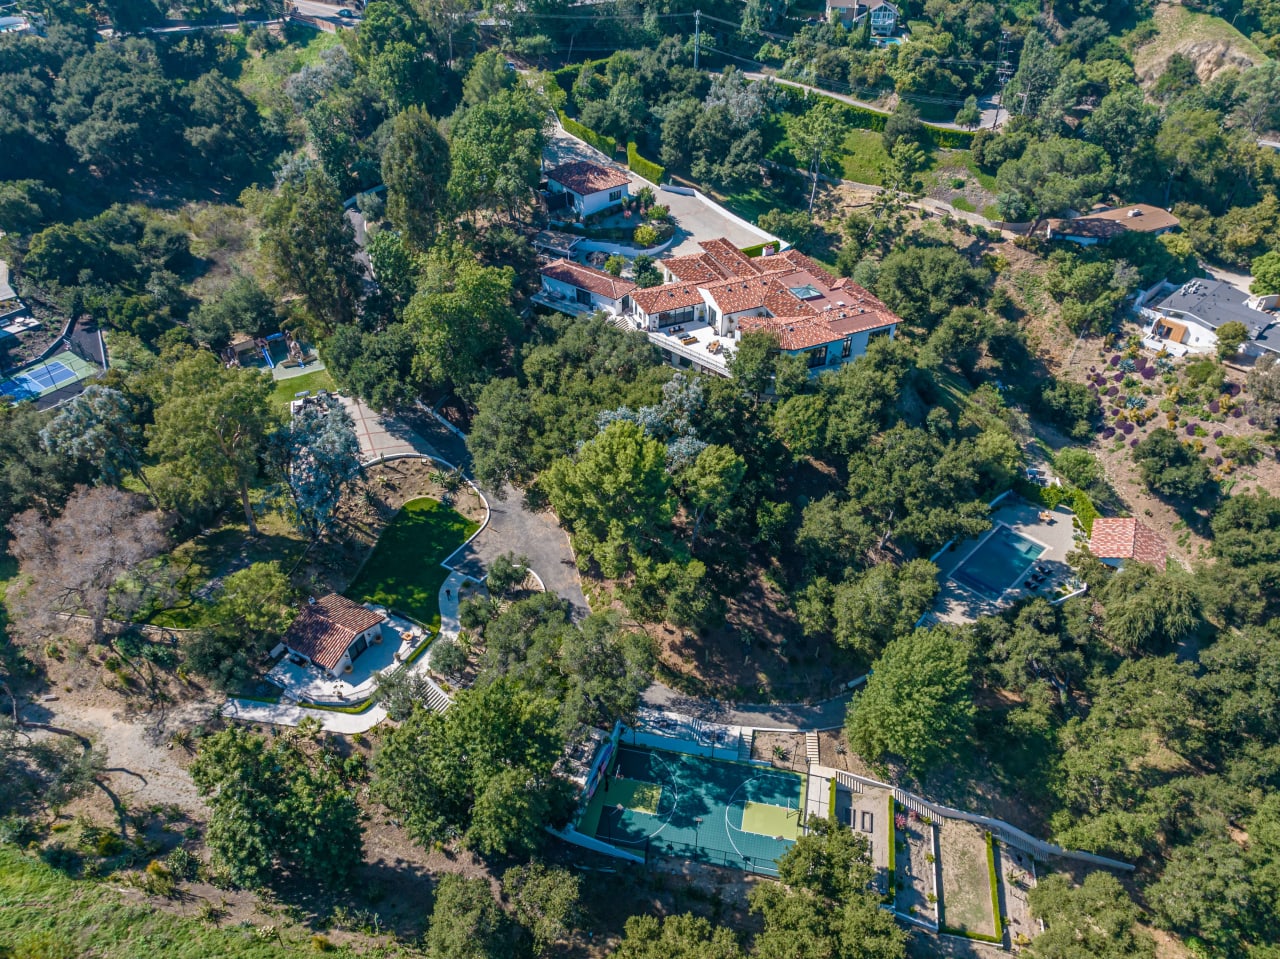 3160 Coldwater Canyon Ave, studio city